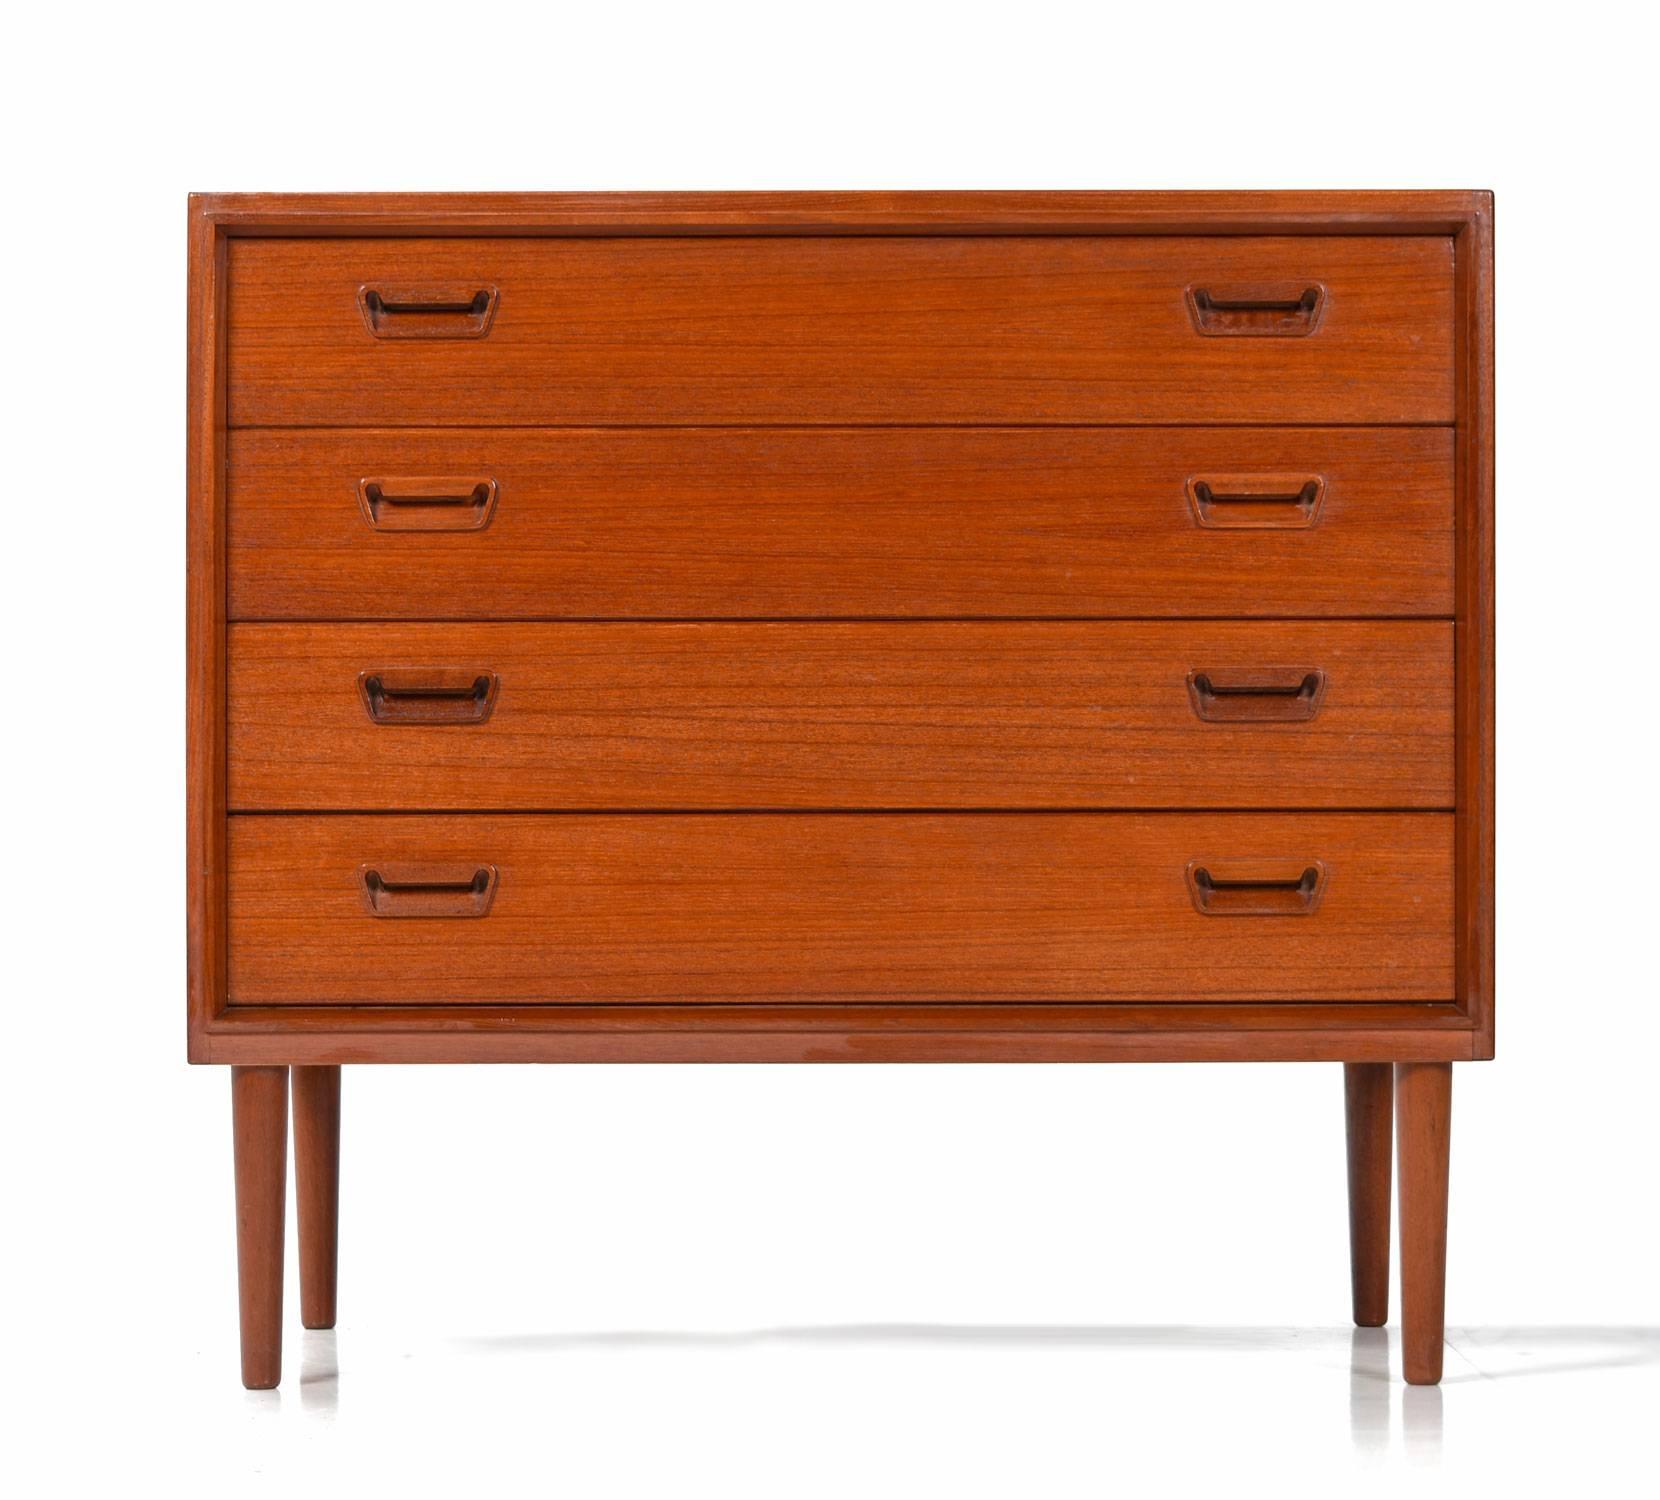 Stunning early Mid-Century Modern Danish teak chest by Munch Mobler. The vintage 1950s cabinets have a deep red hue patina to the over half-a-century old teak wood. The cabinet is exquisitely crafted with tight dovetail drawers and all wood